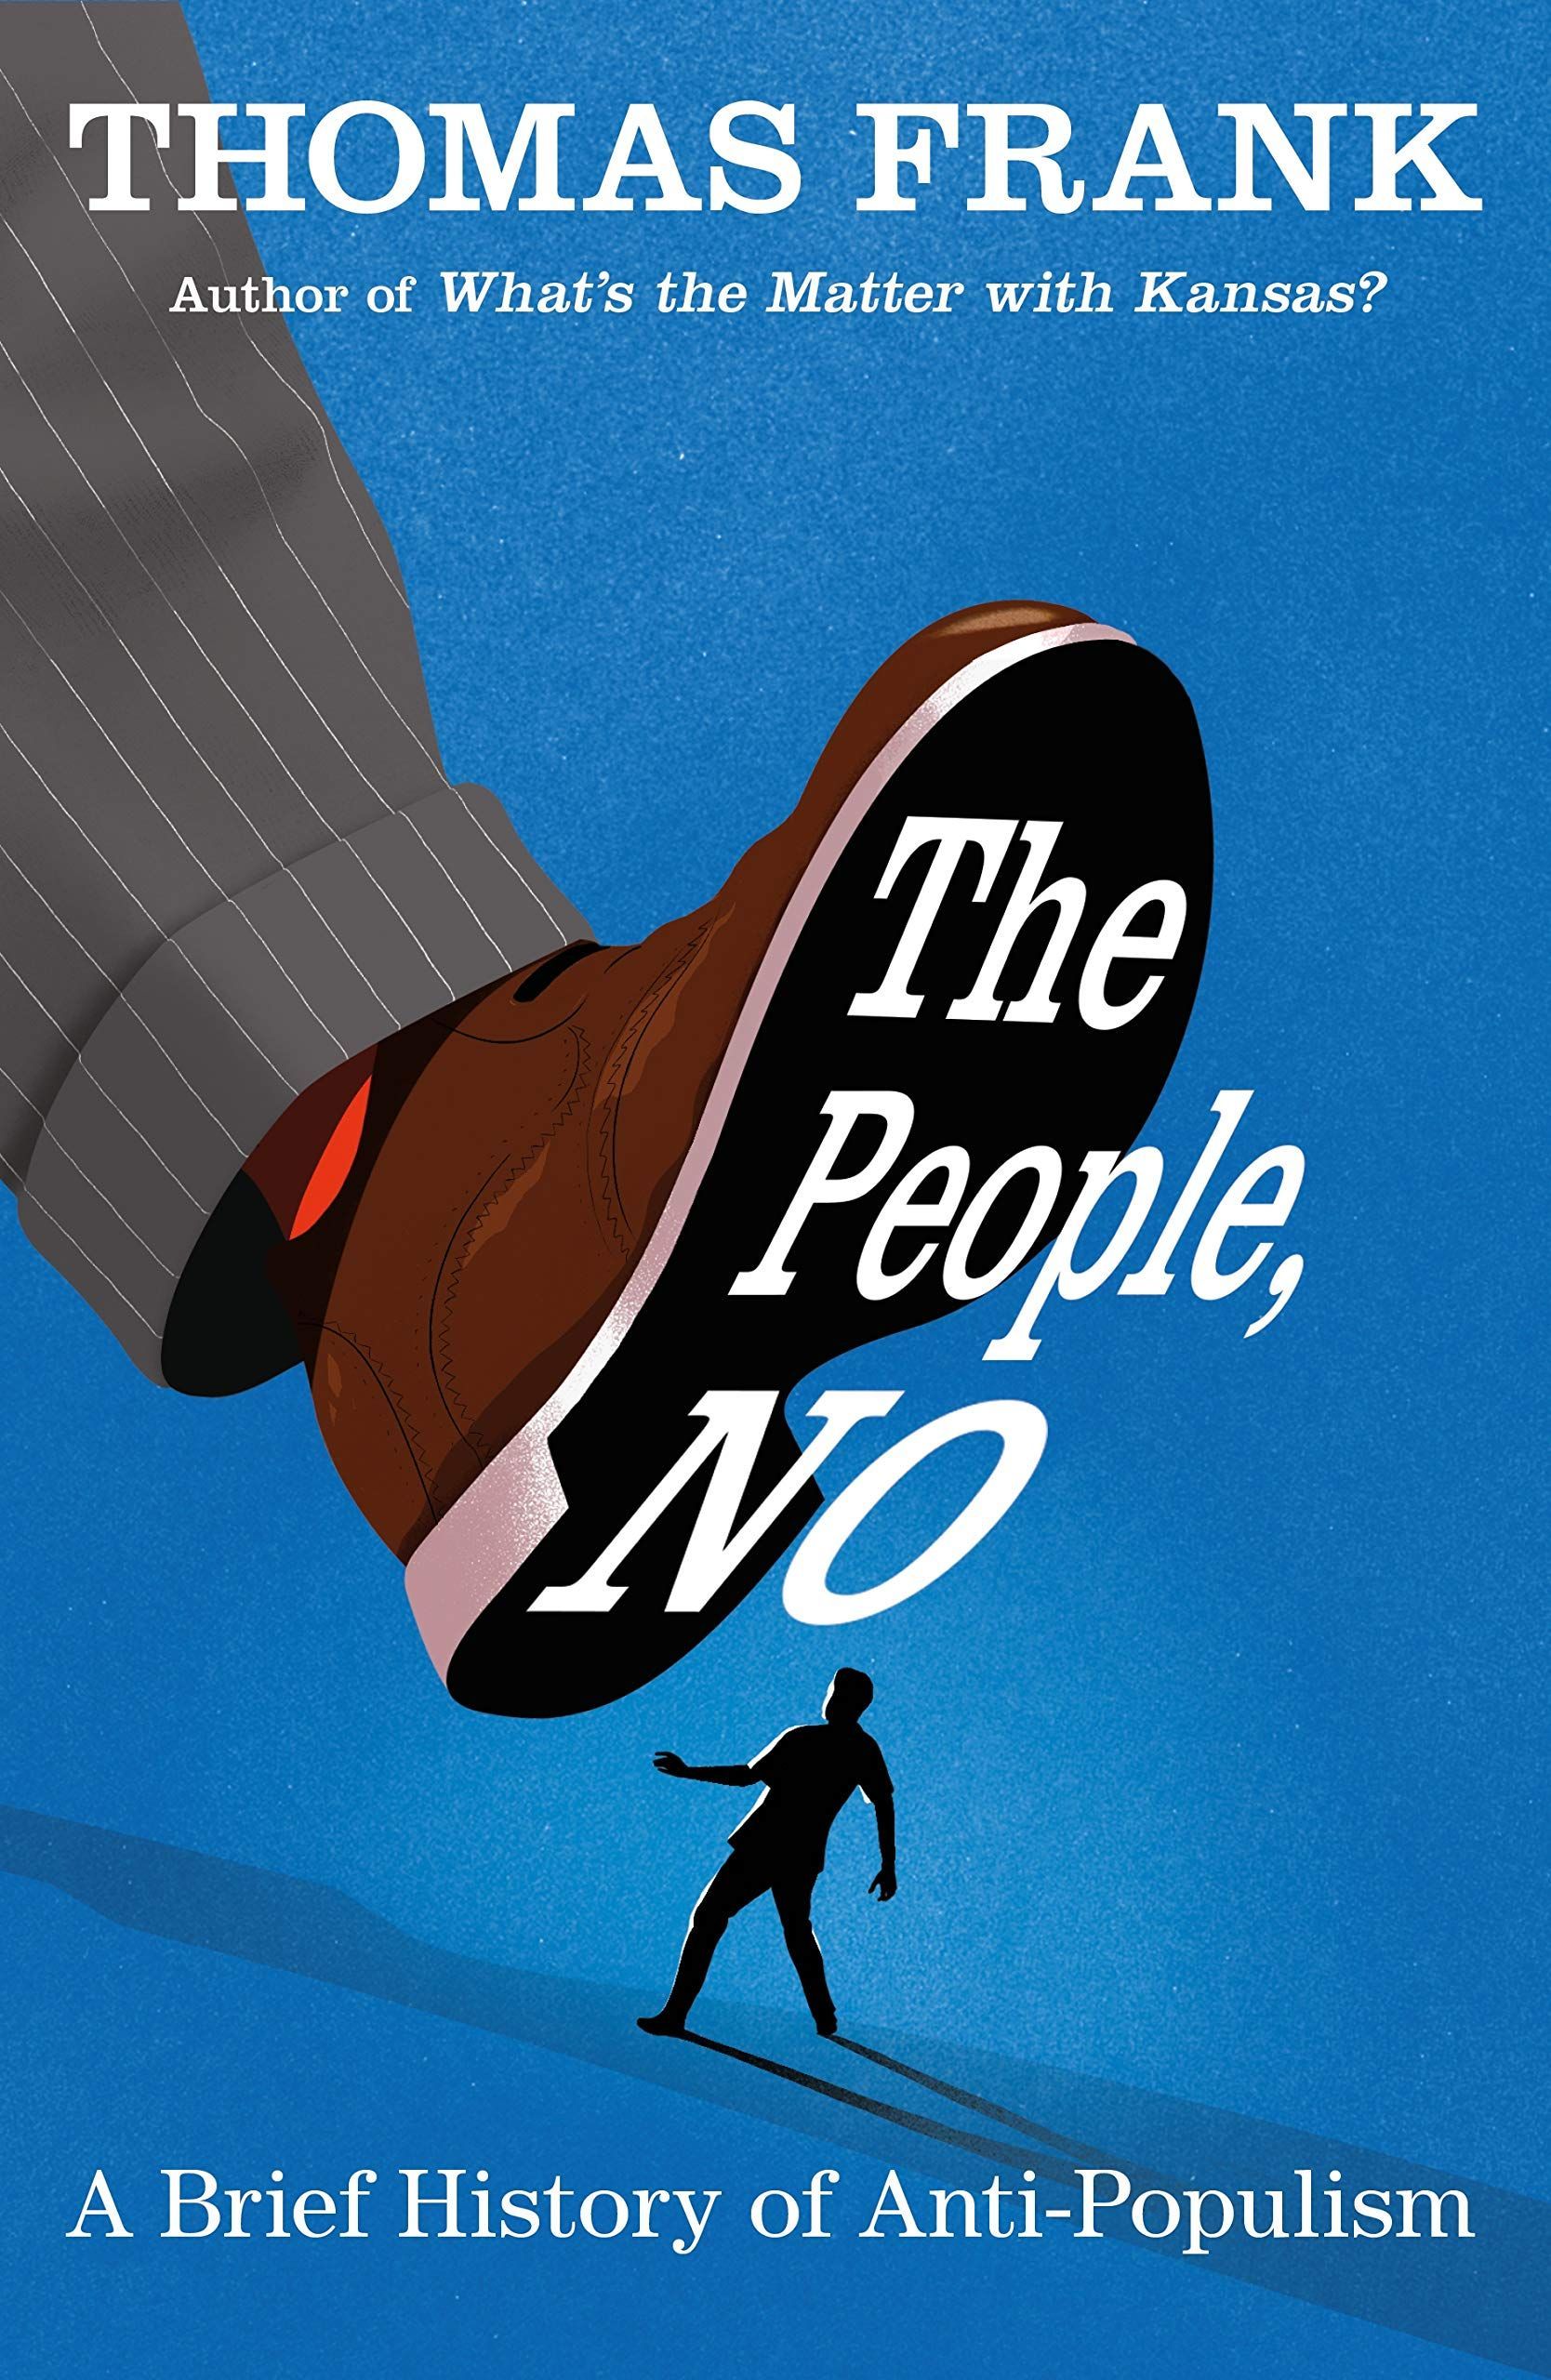 Reclaiming “Populism”: On Thomas Frank’s “The People, No”